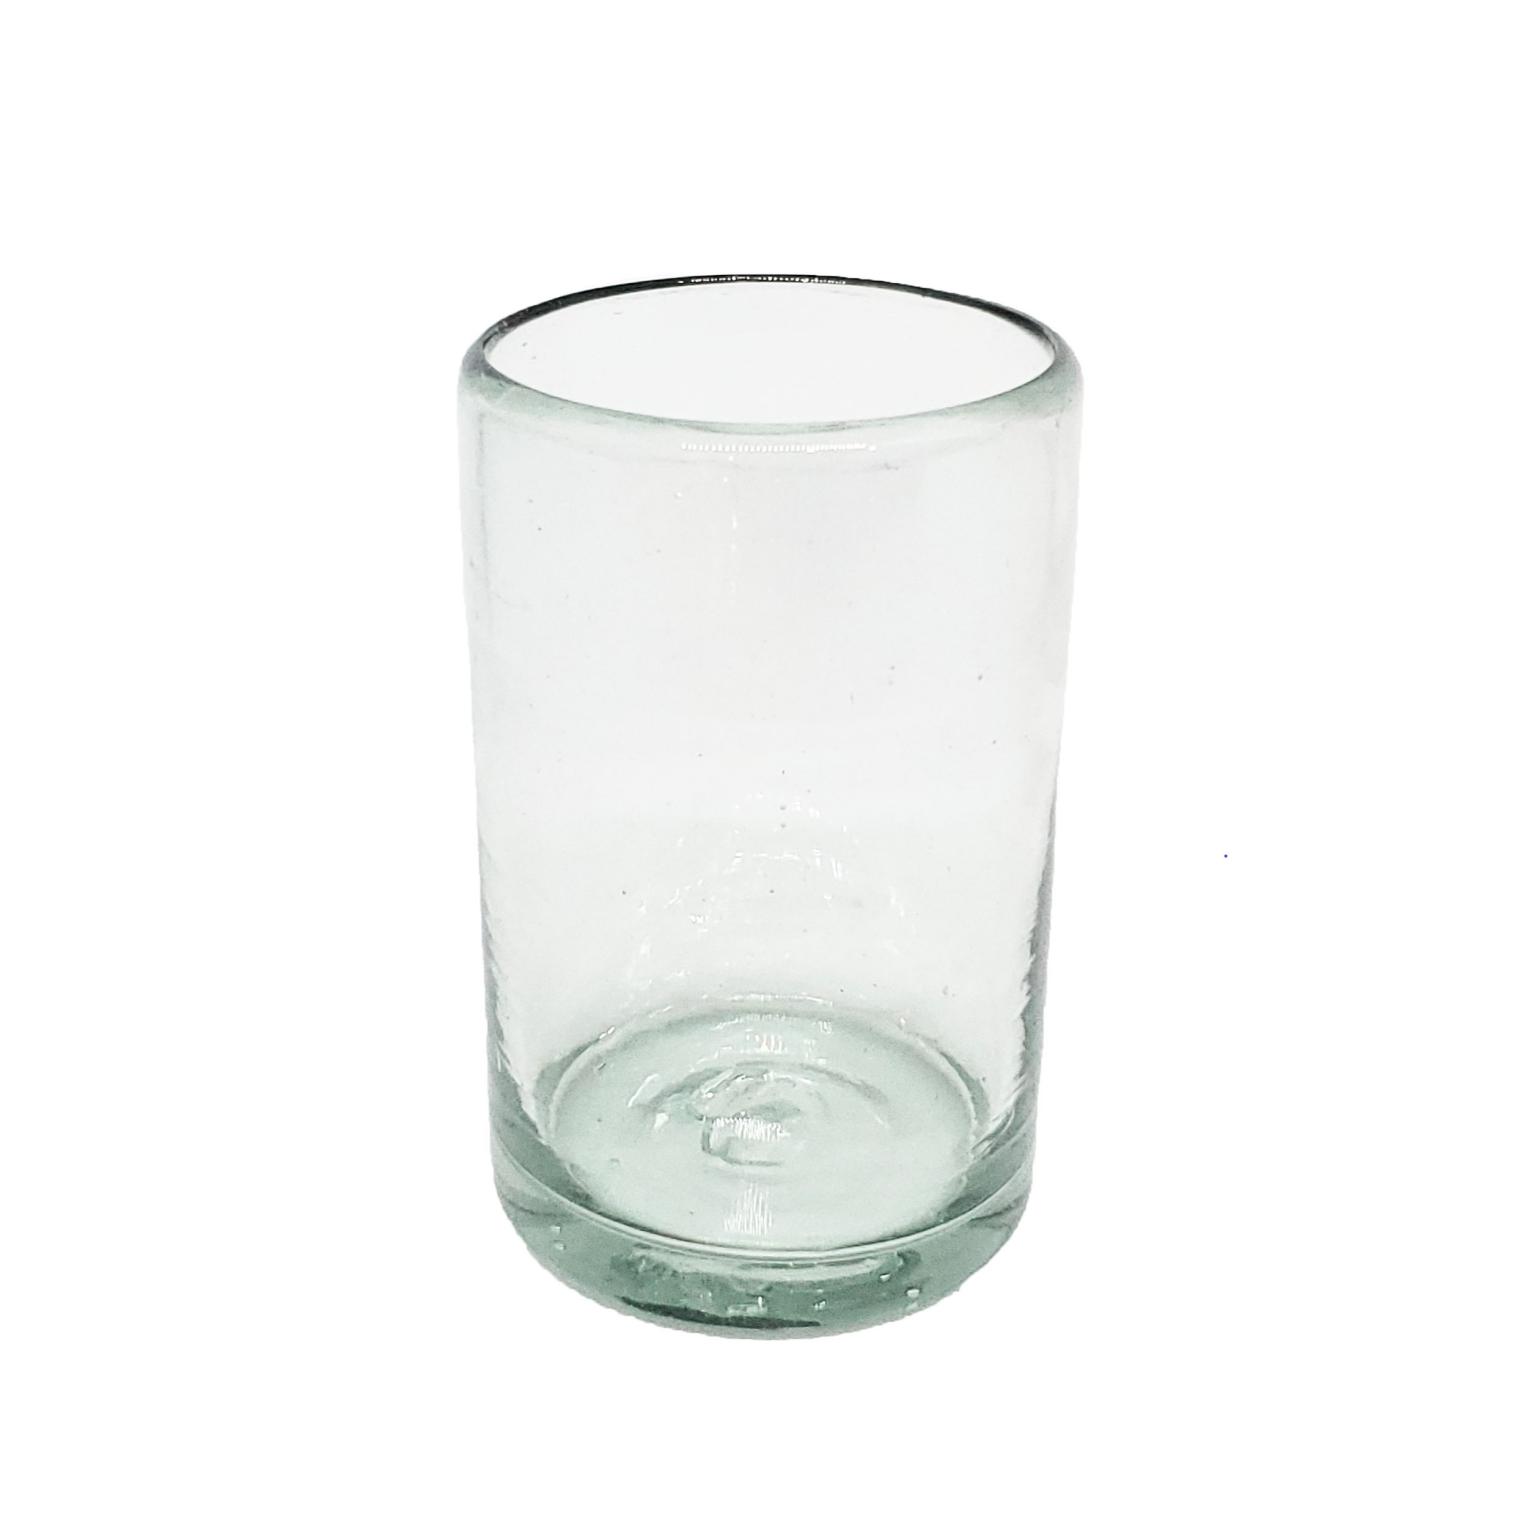 Sale Items / Clear 9 oz Juice Glasses  / These handcrafted glasses deliver a classic touch to your favorite drink.